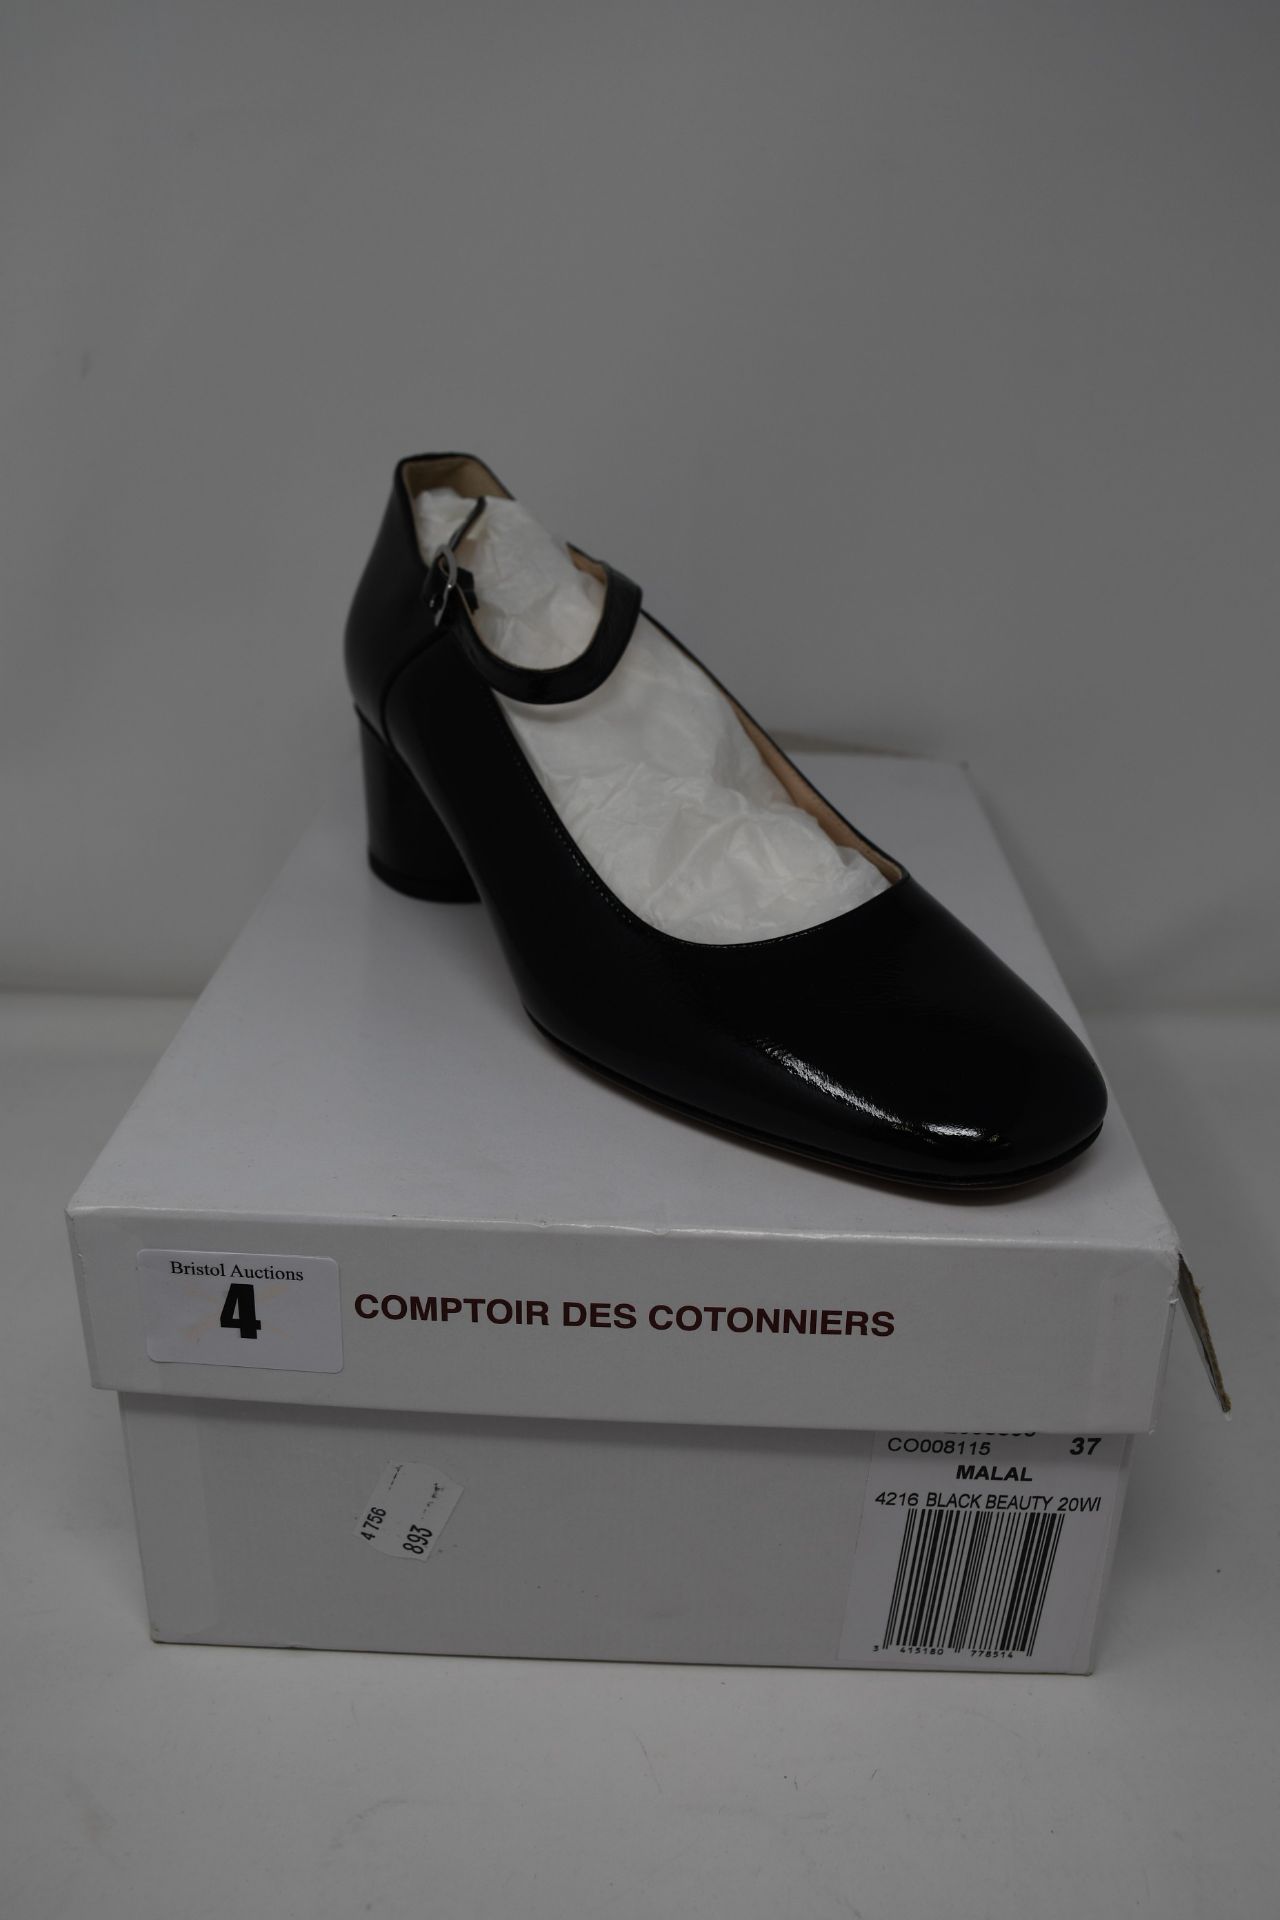 One as new Comptoir Des Cotonniers Mary Janes in patent leather with a round heel shoes size 37 (